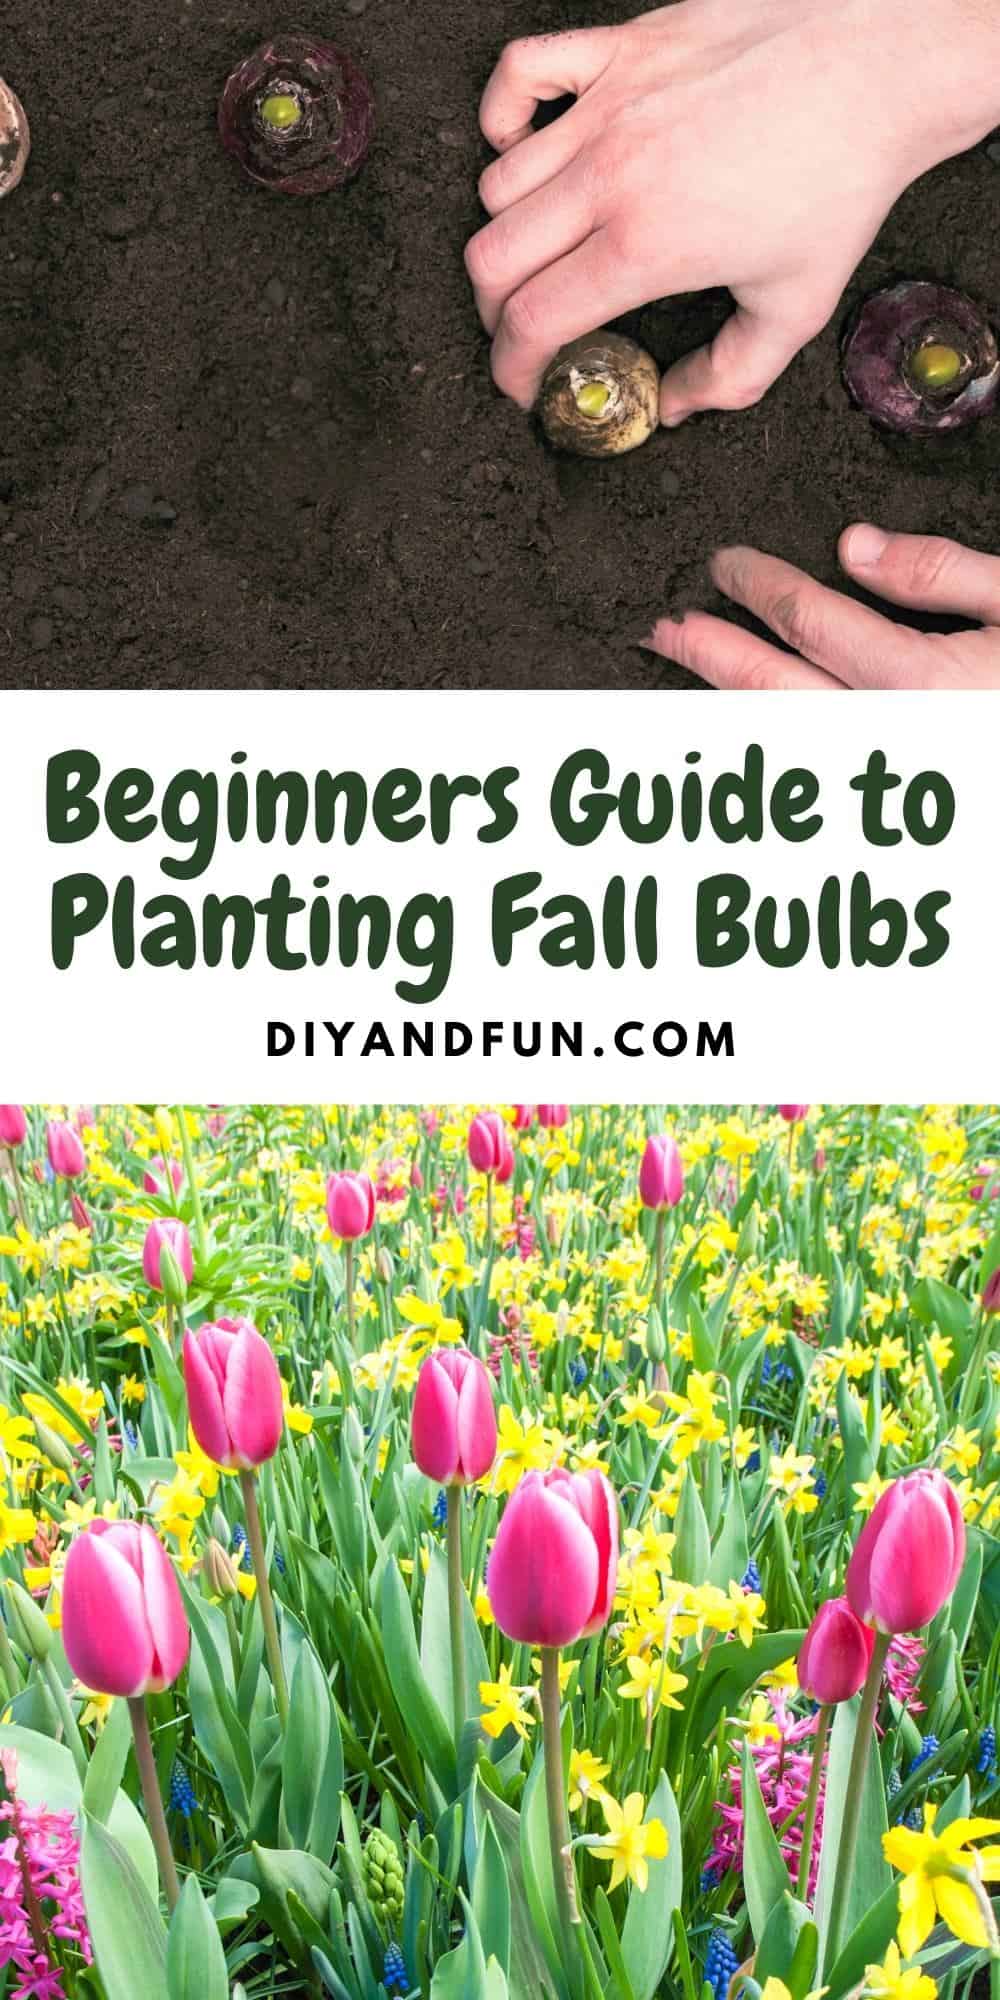 Beginners Guide to Planting Fall Bulbs, a simple guide for how to plant flower bulbs in the fall for a spring bloom